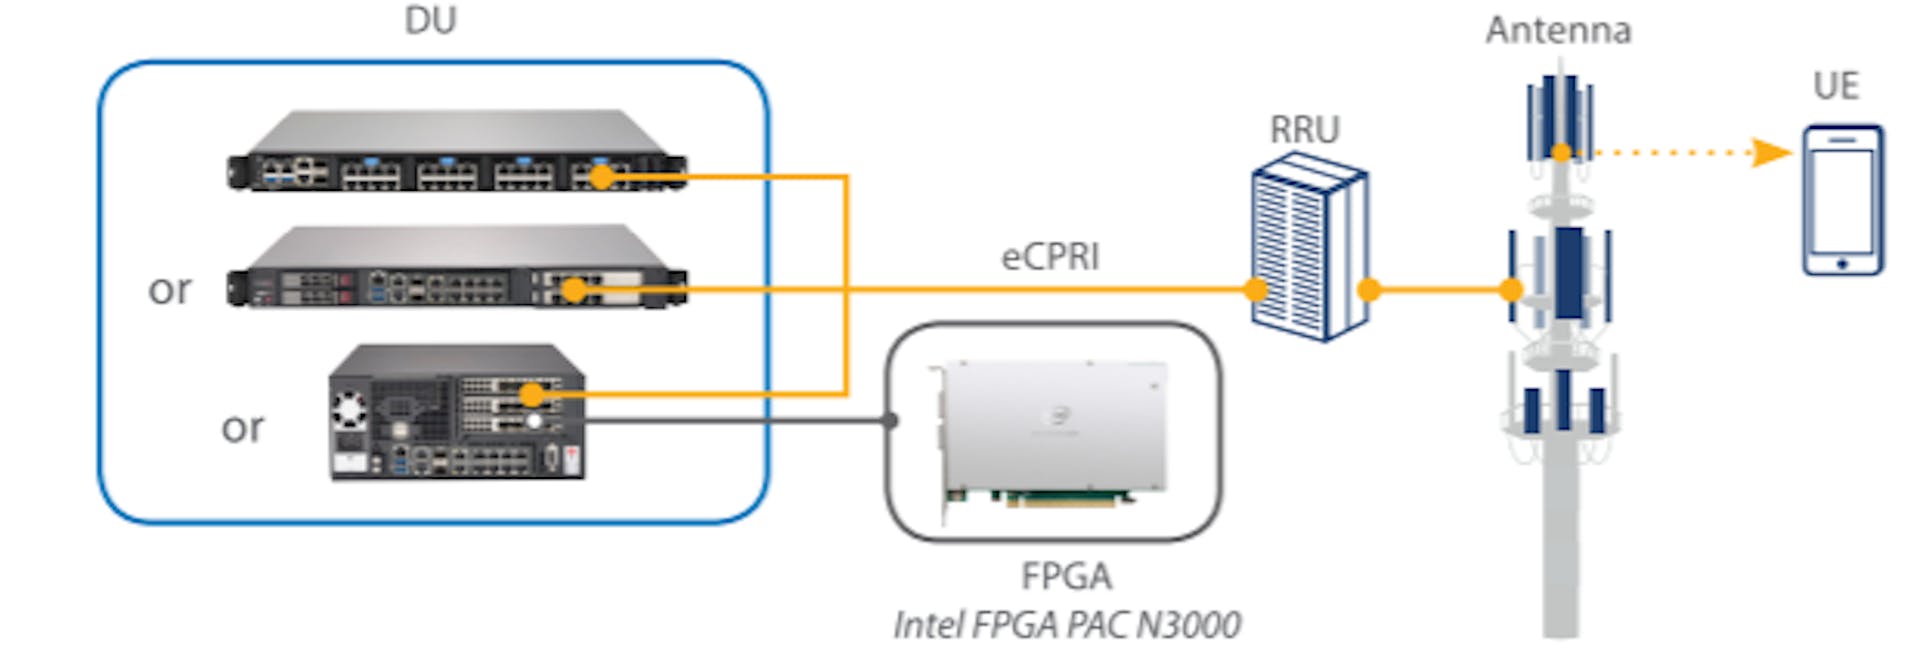 Figure 5. Supermicro’s DU reference designs based on Intel Xeon Processors for O-RAN